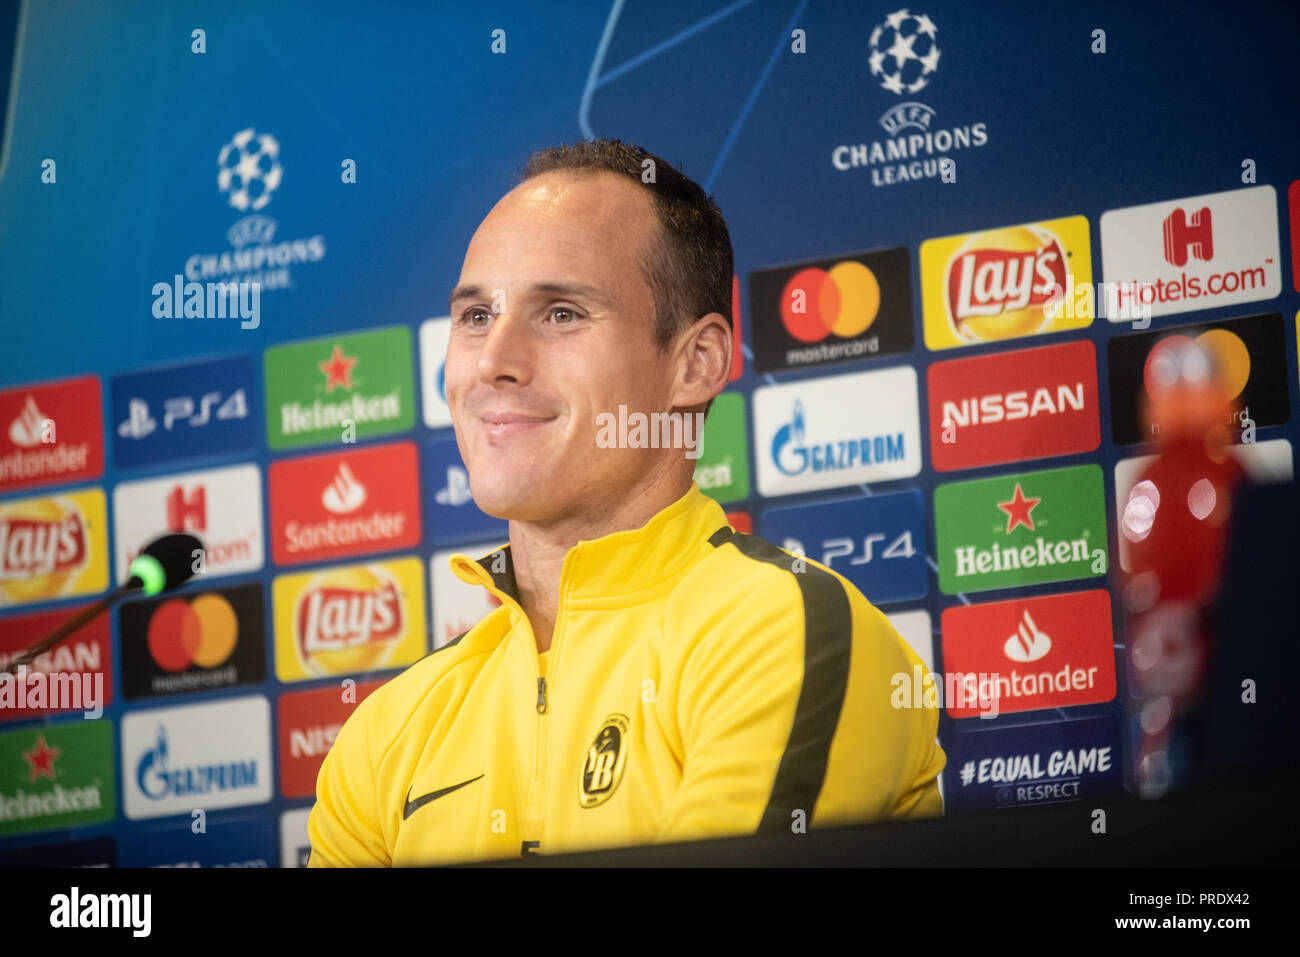 Turin, Italy. 1st Oct 2018. Steve von Bergen (Young Boys) during the press conference before the UEFA Champions League group stage match between Juventus and Young Boys at the Juventus Stadium, Turin, Italy on 1 October 2018 Credit: Alberto Gandolfo/Alamy Live News Stock Photo